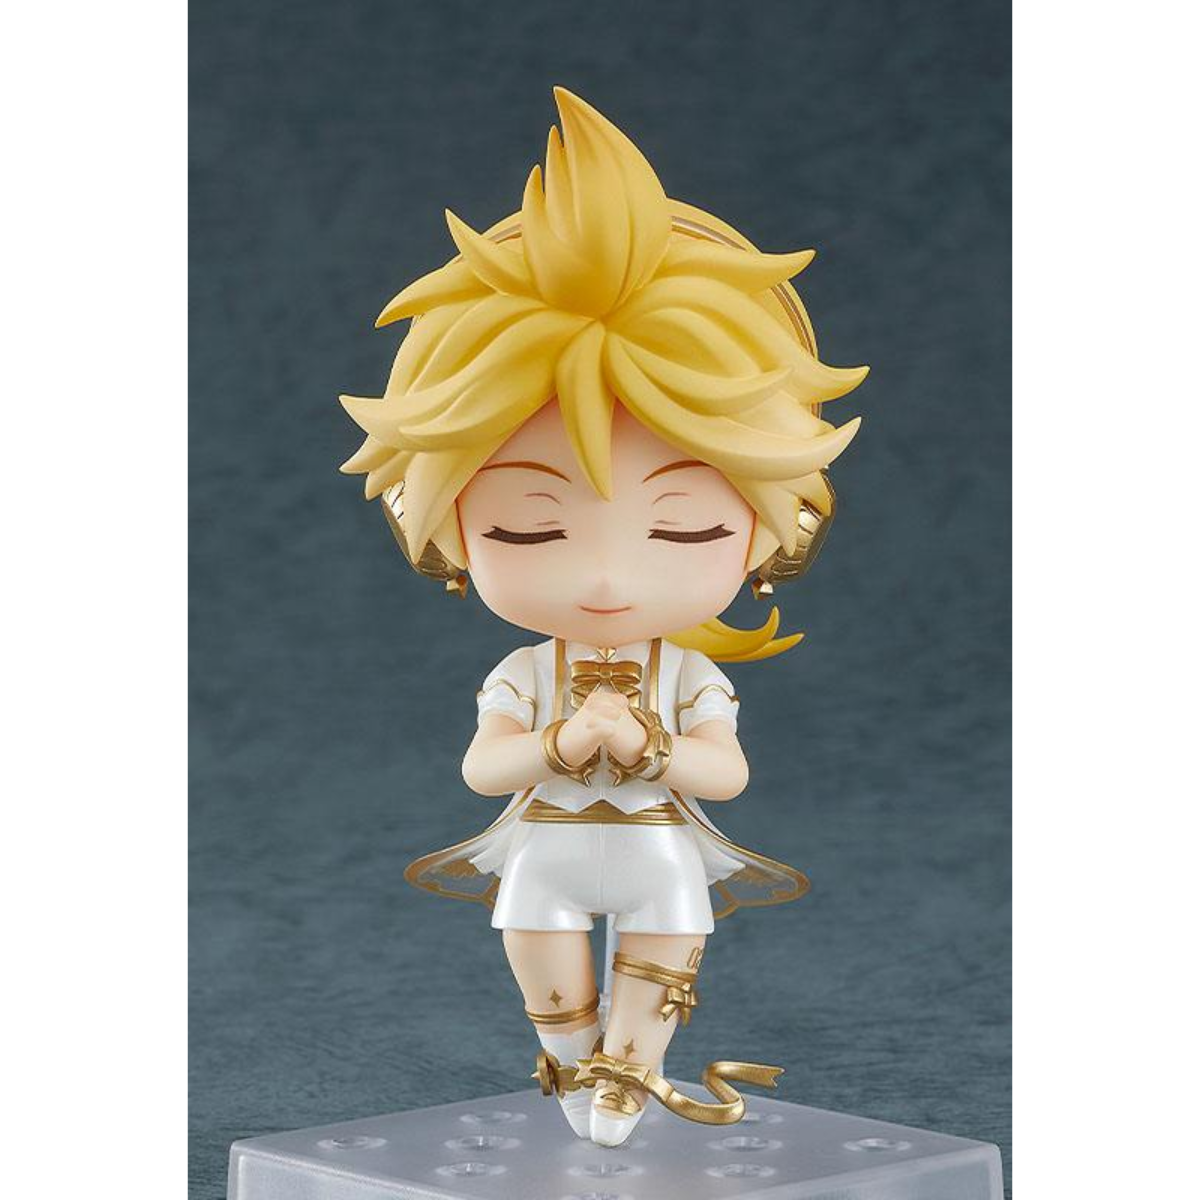 Character Vocal Series 02: Kagamine Rin/Len [1919] Nendoroid &quot;Kagamine Len&quot; (Symphony 2022 Ver.)-Good Smile Company-Ace Cards &amp; Collectibles